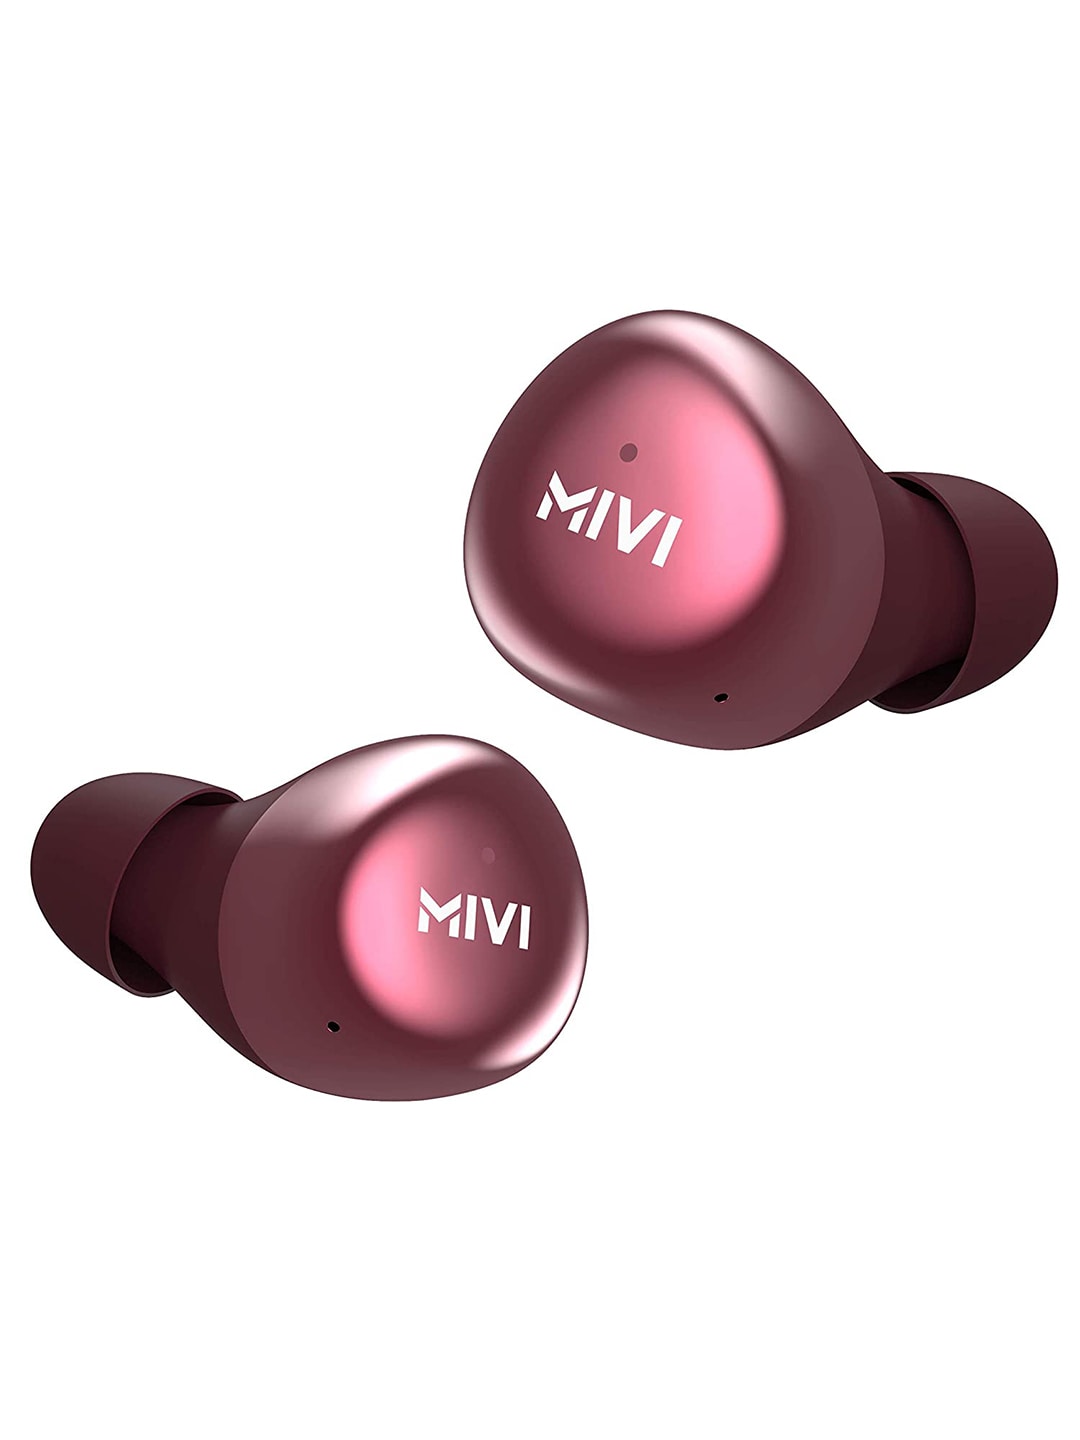 mivi Duopods M40 True Wireless Bluetooth Earbuds with Touch Control 24hrs Playtime - Red Price in India